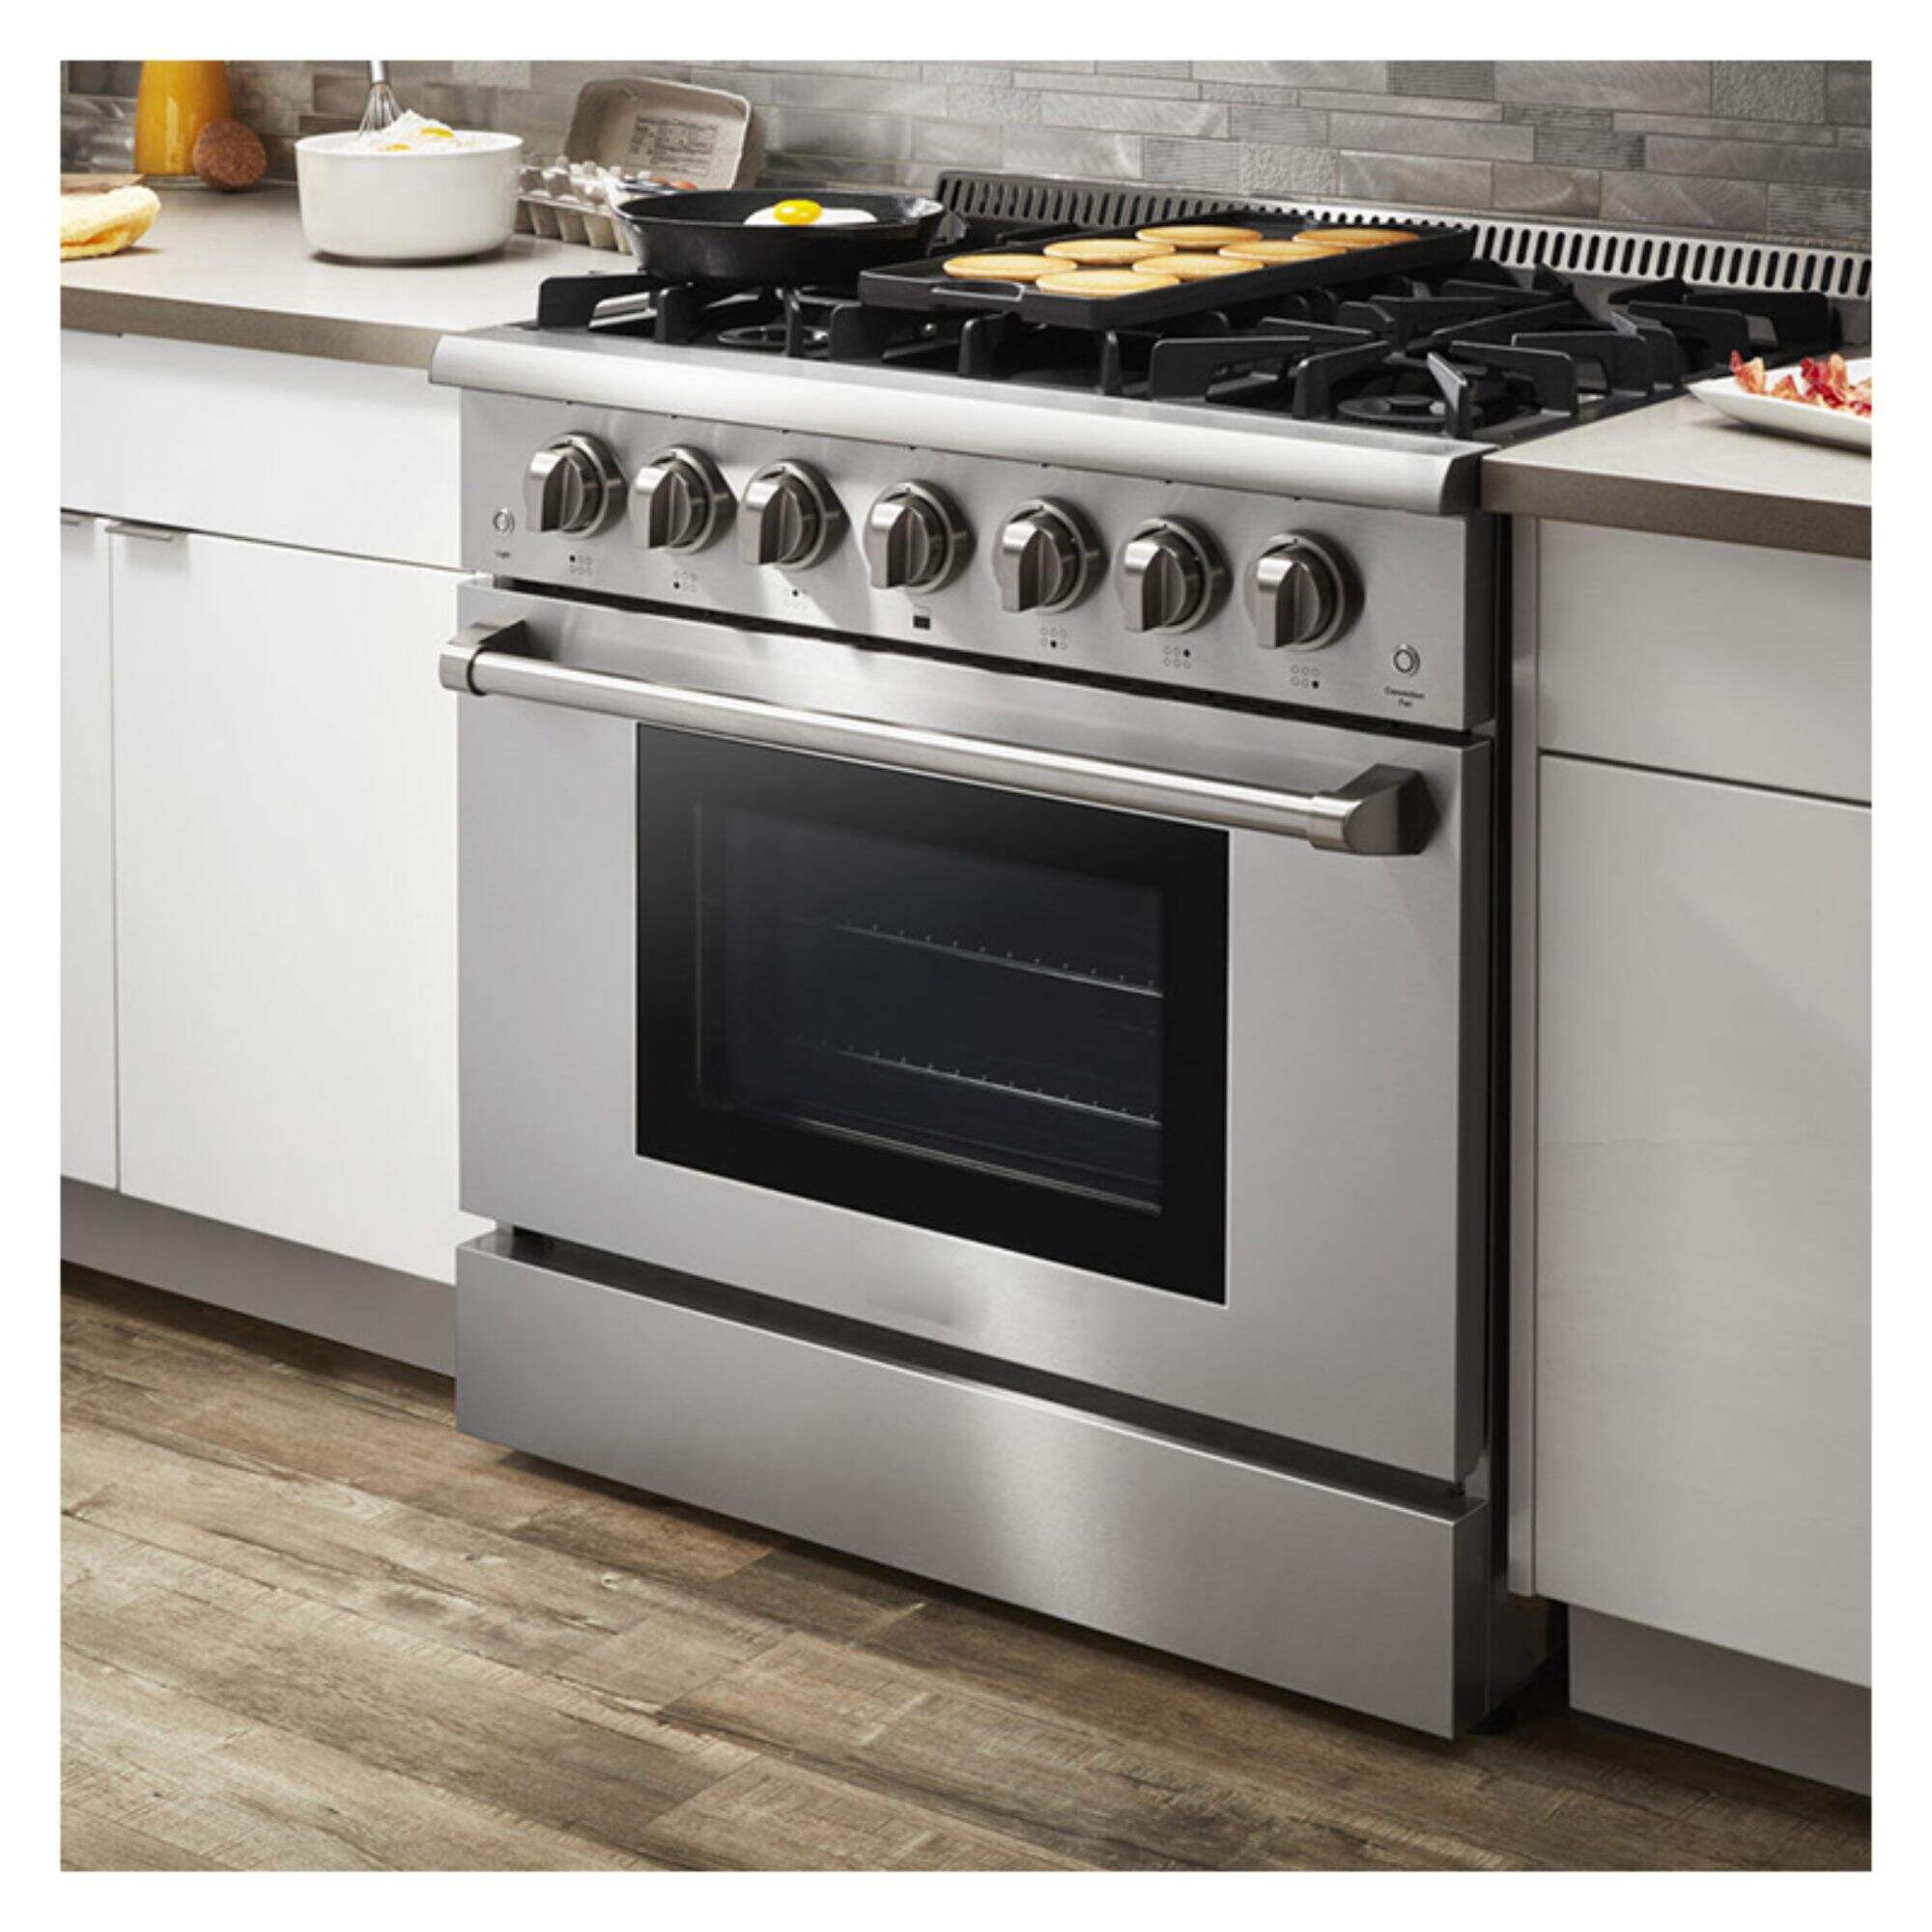 Cost analysis: What is the price range of a good gas oven?